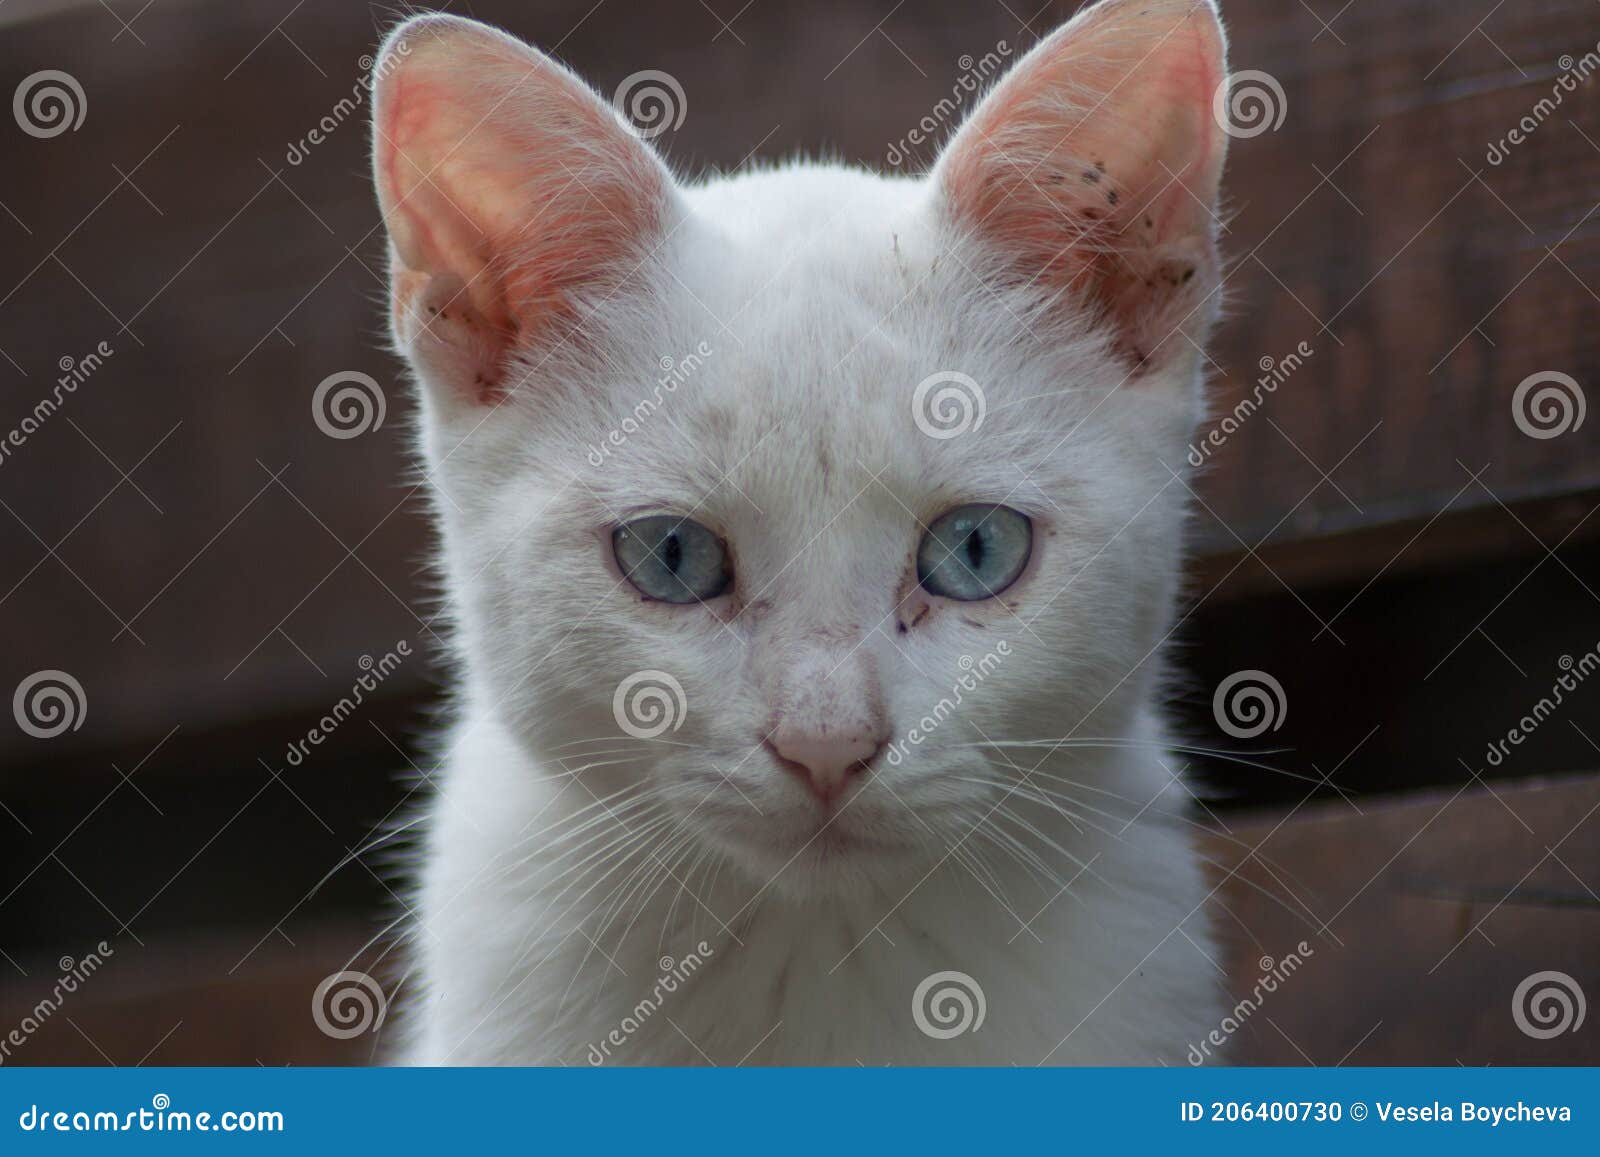 Beautiful Close Up Portrait Of Stray Cat Outdoors Homeless Animal Cute Street Kitty White Cat With Beautiful Blue Eyes Stock Photo Image Of Domestic Abandoned 206400730